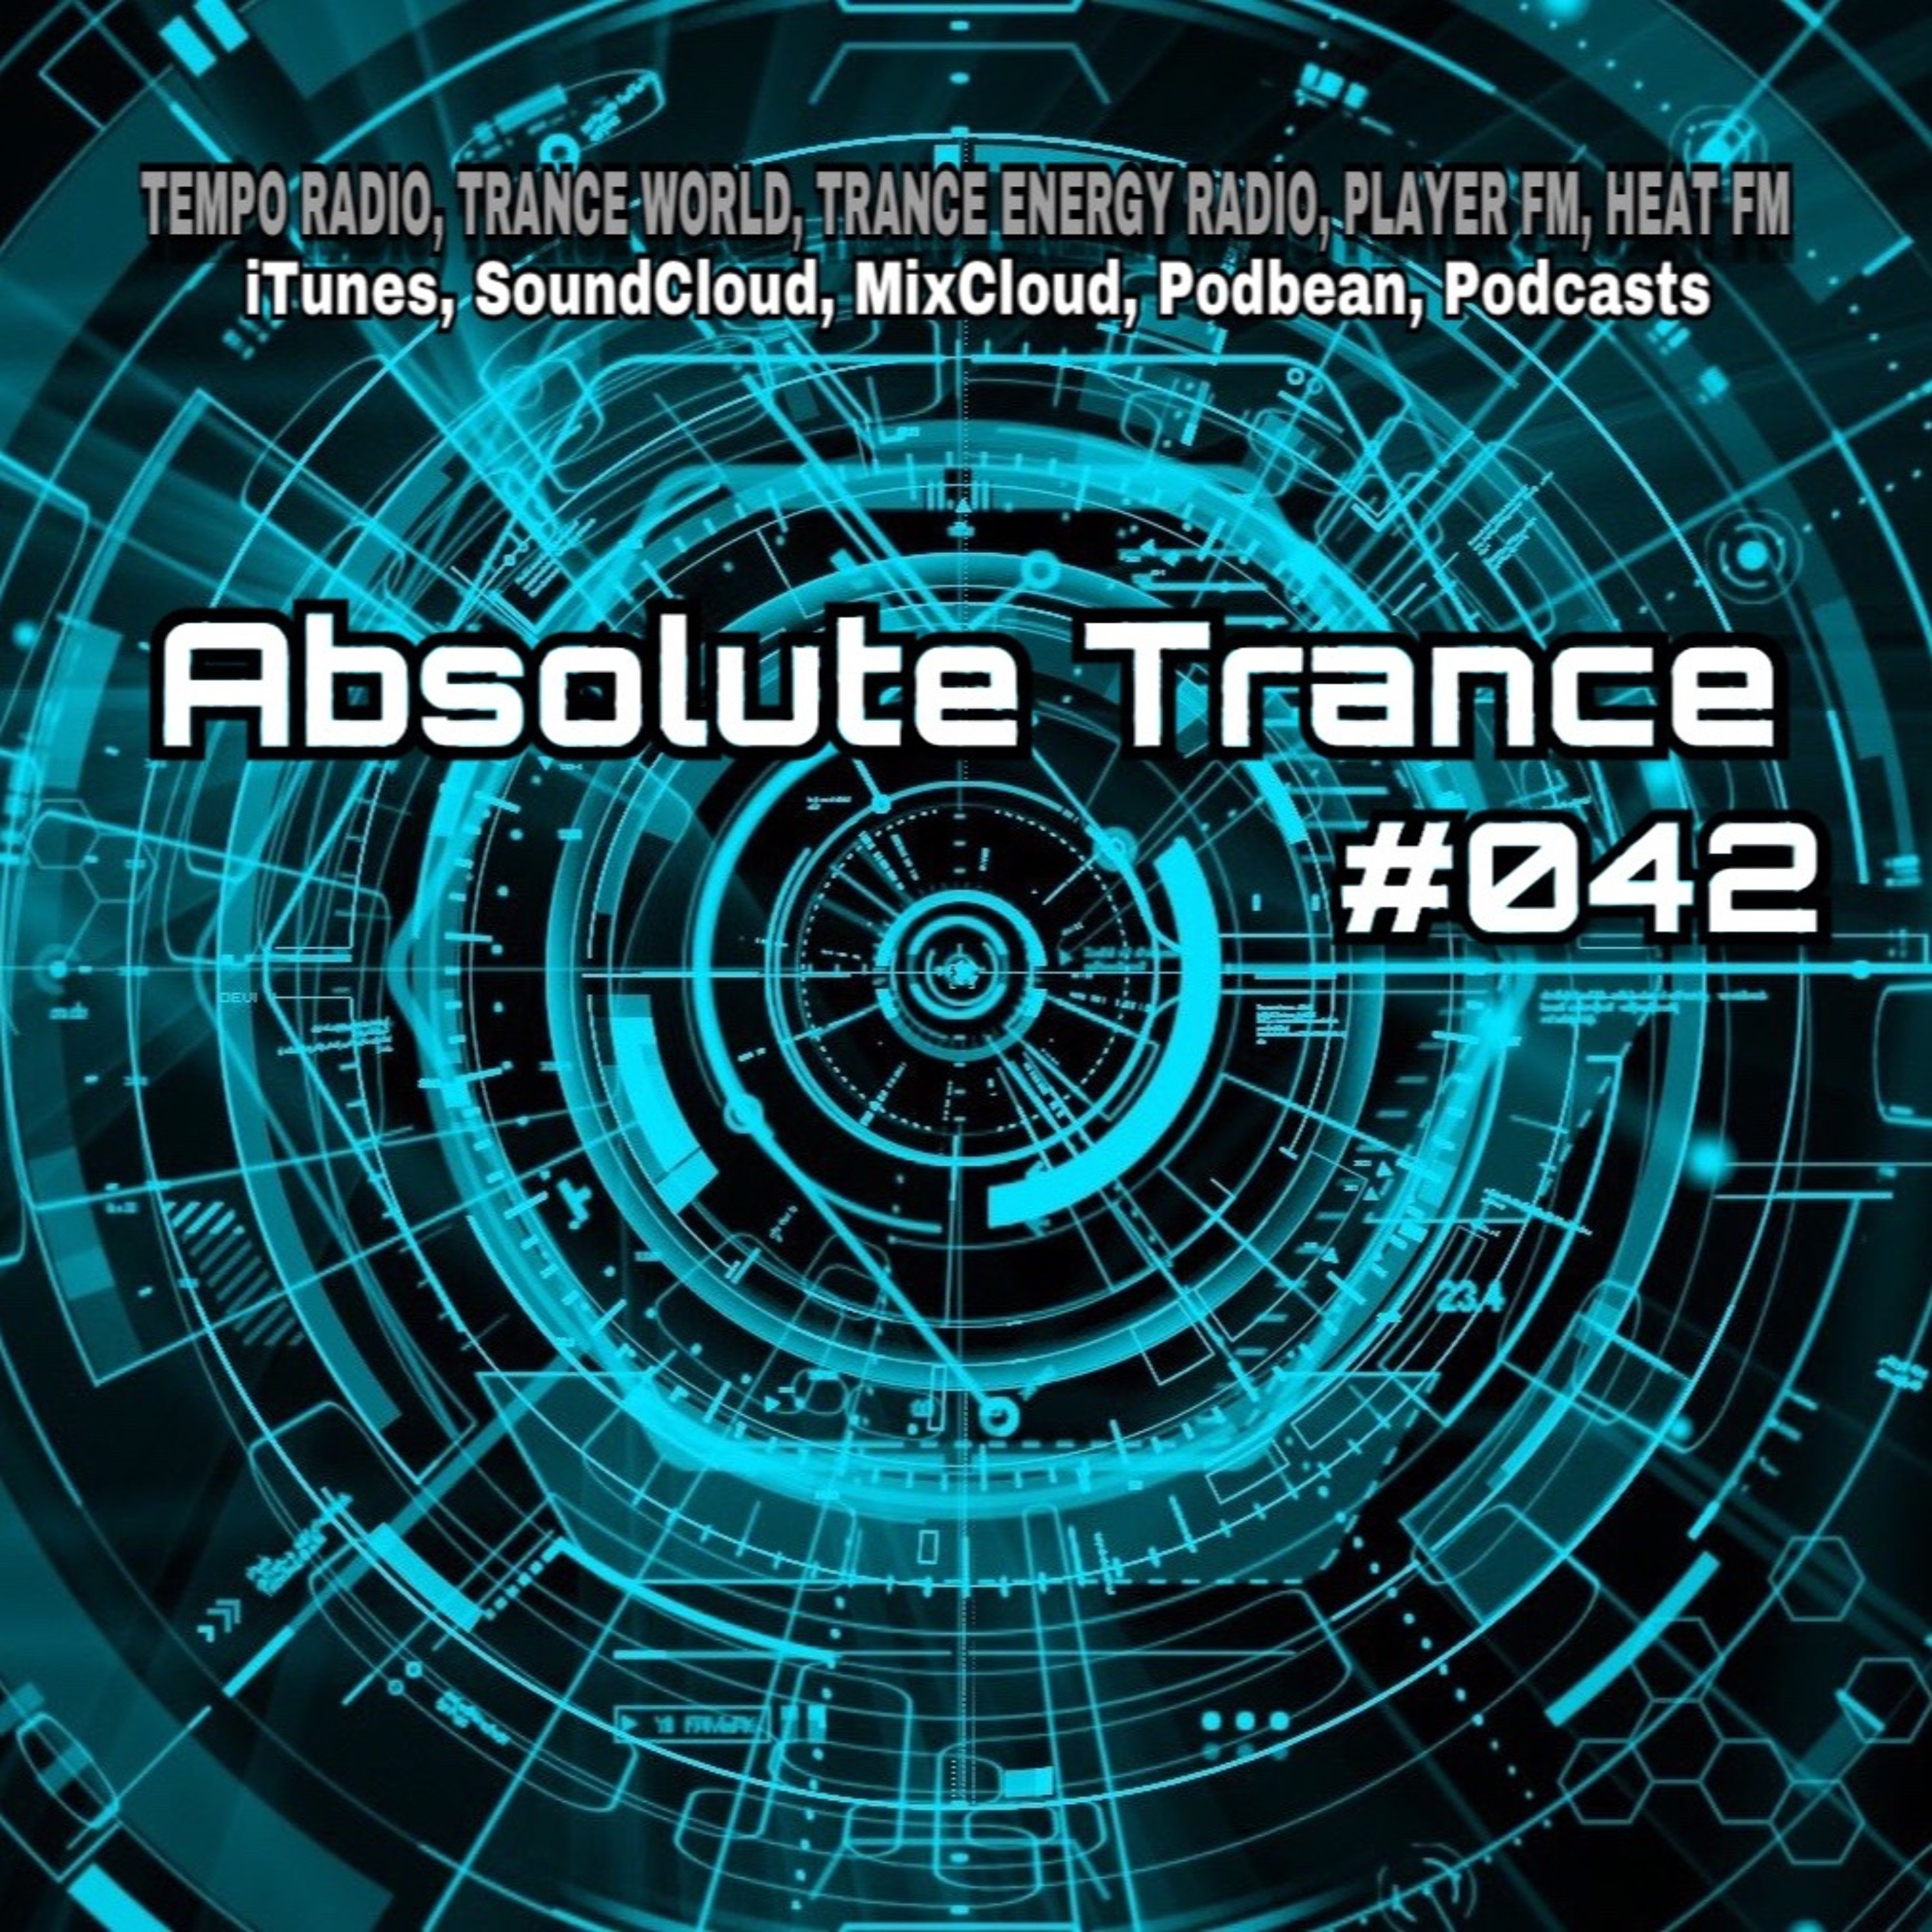 Absolute Trance #042